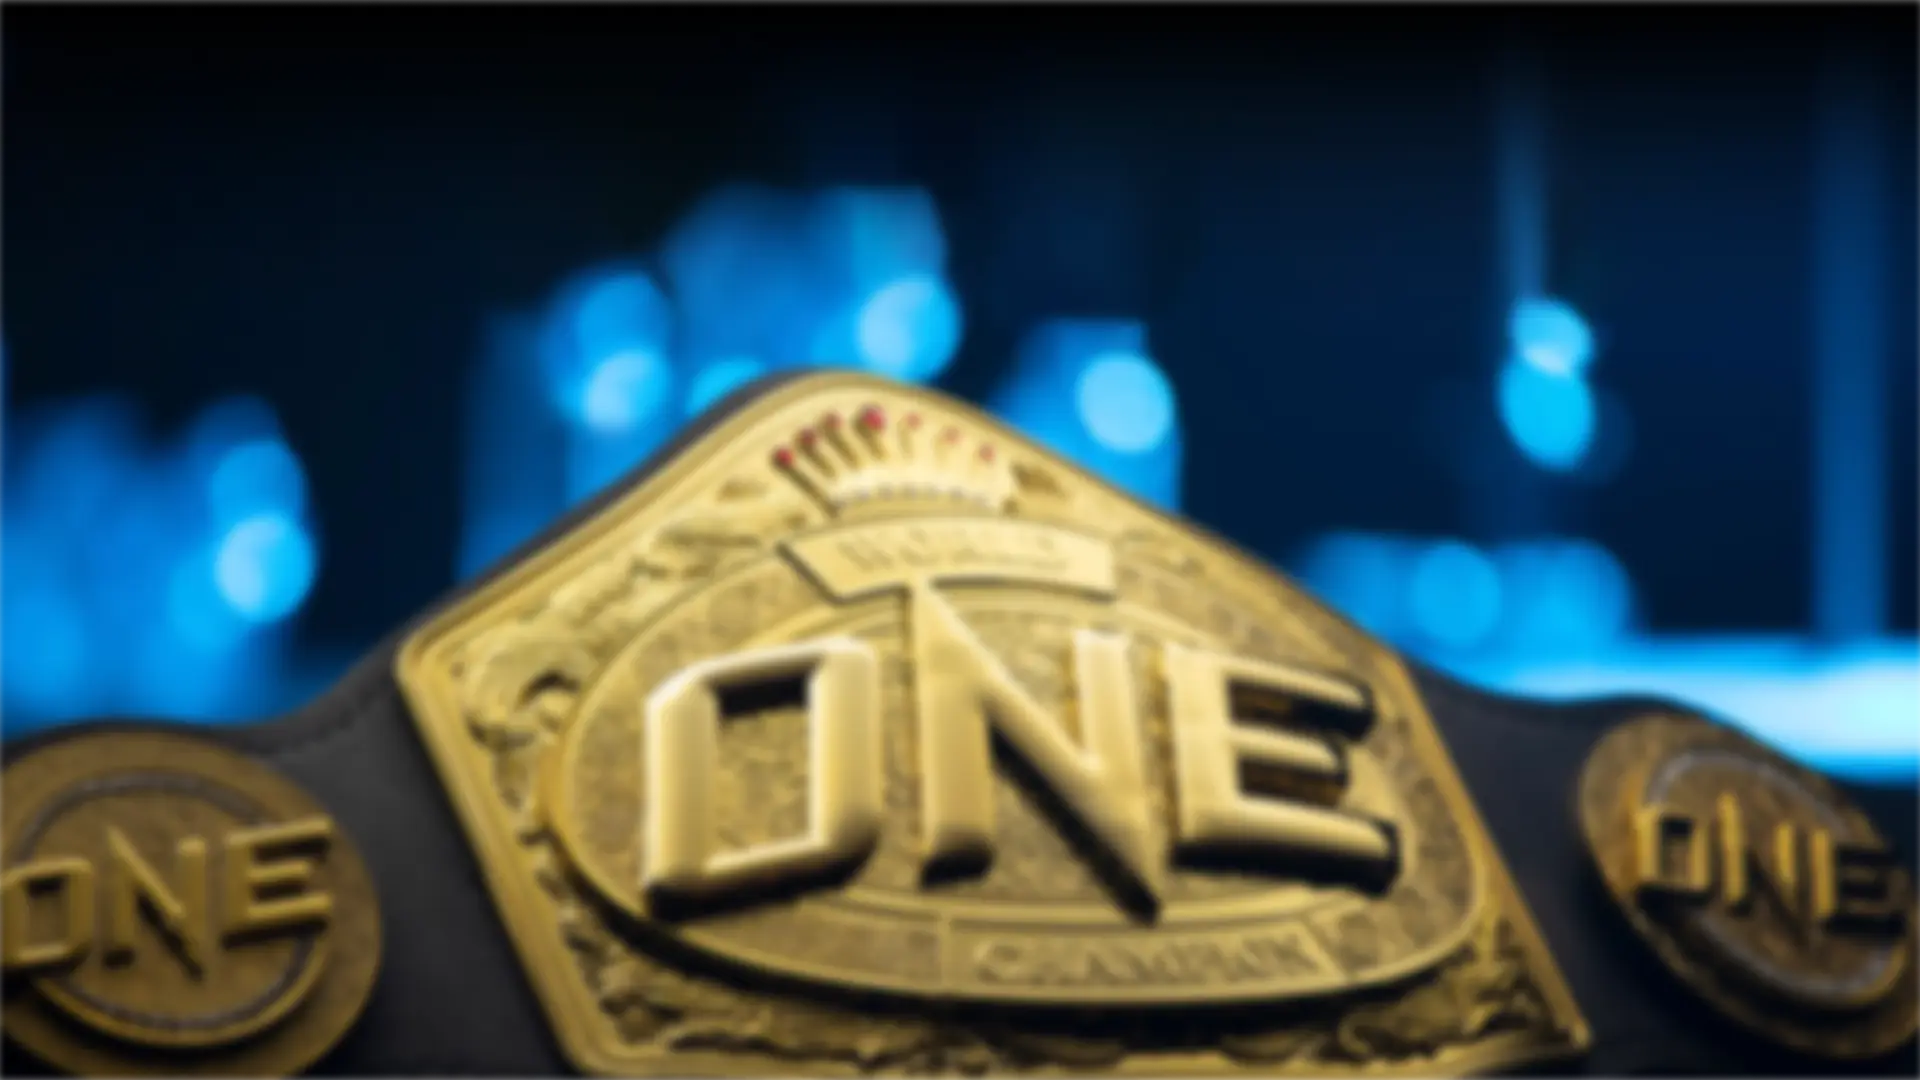 ONE Championship Fights Online Live MMA Streams, Replays, Highlights